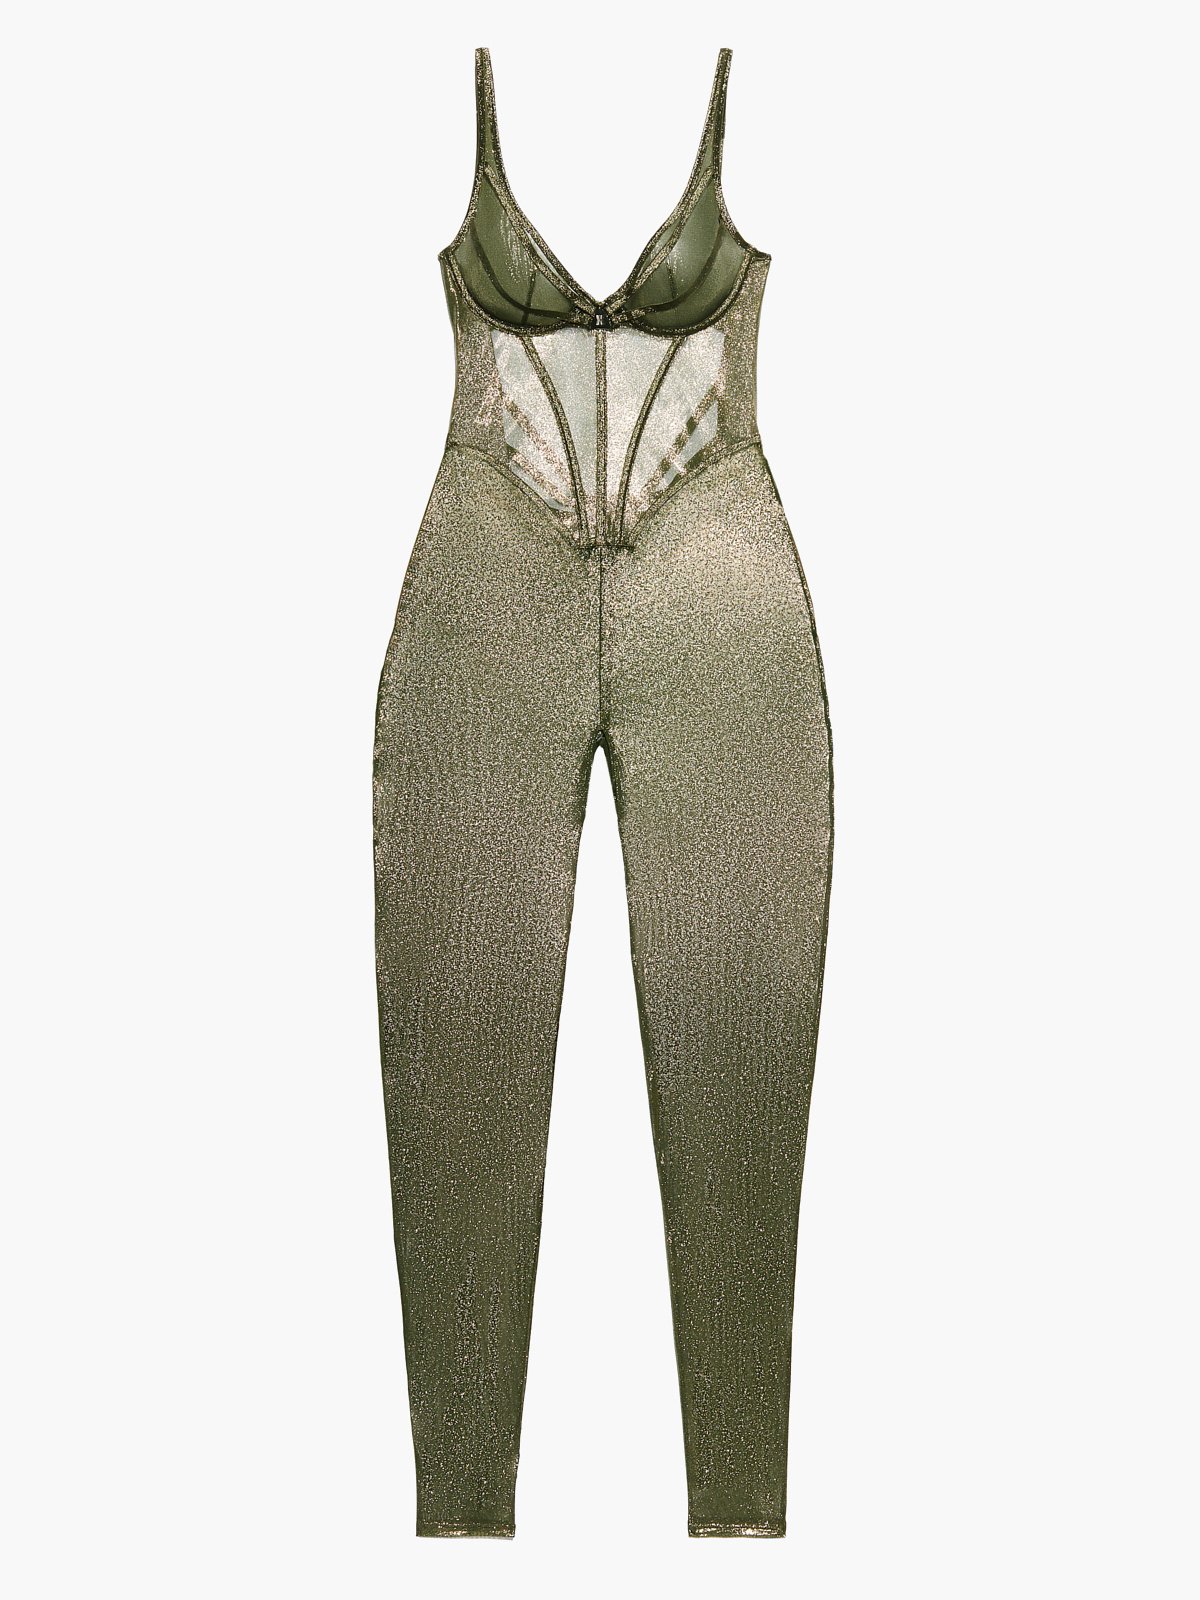 Going Platinum Mesh Crotchless Catsuit in Green | SAVAGE X FENTY